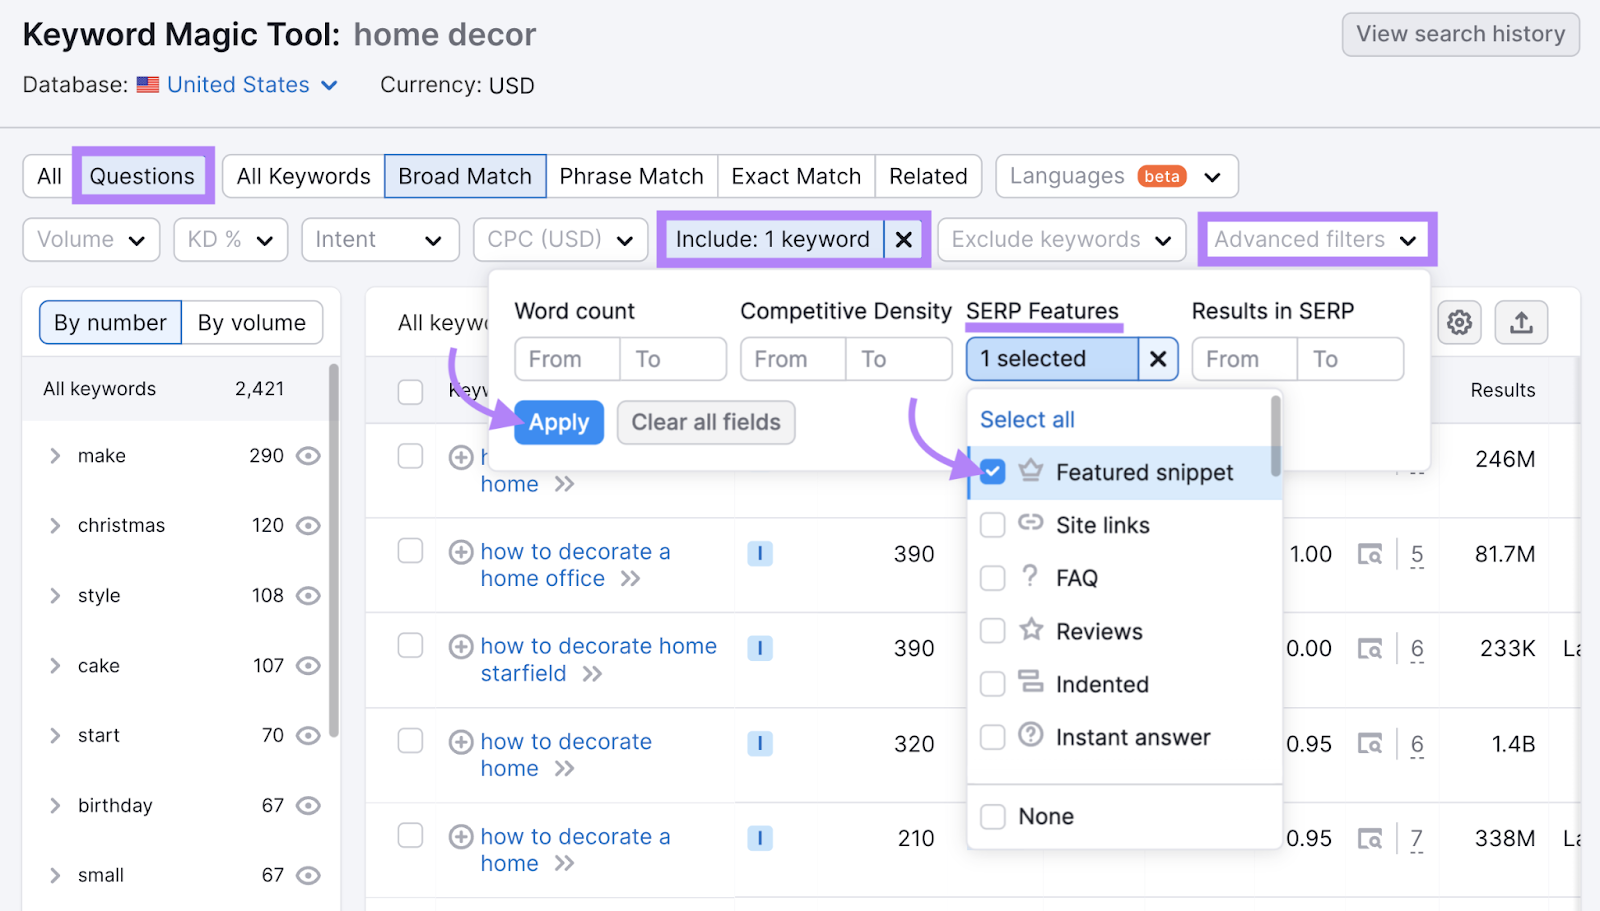 Applying filters in Keyword Magic Tool results for "home decor"